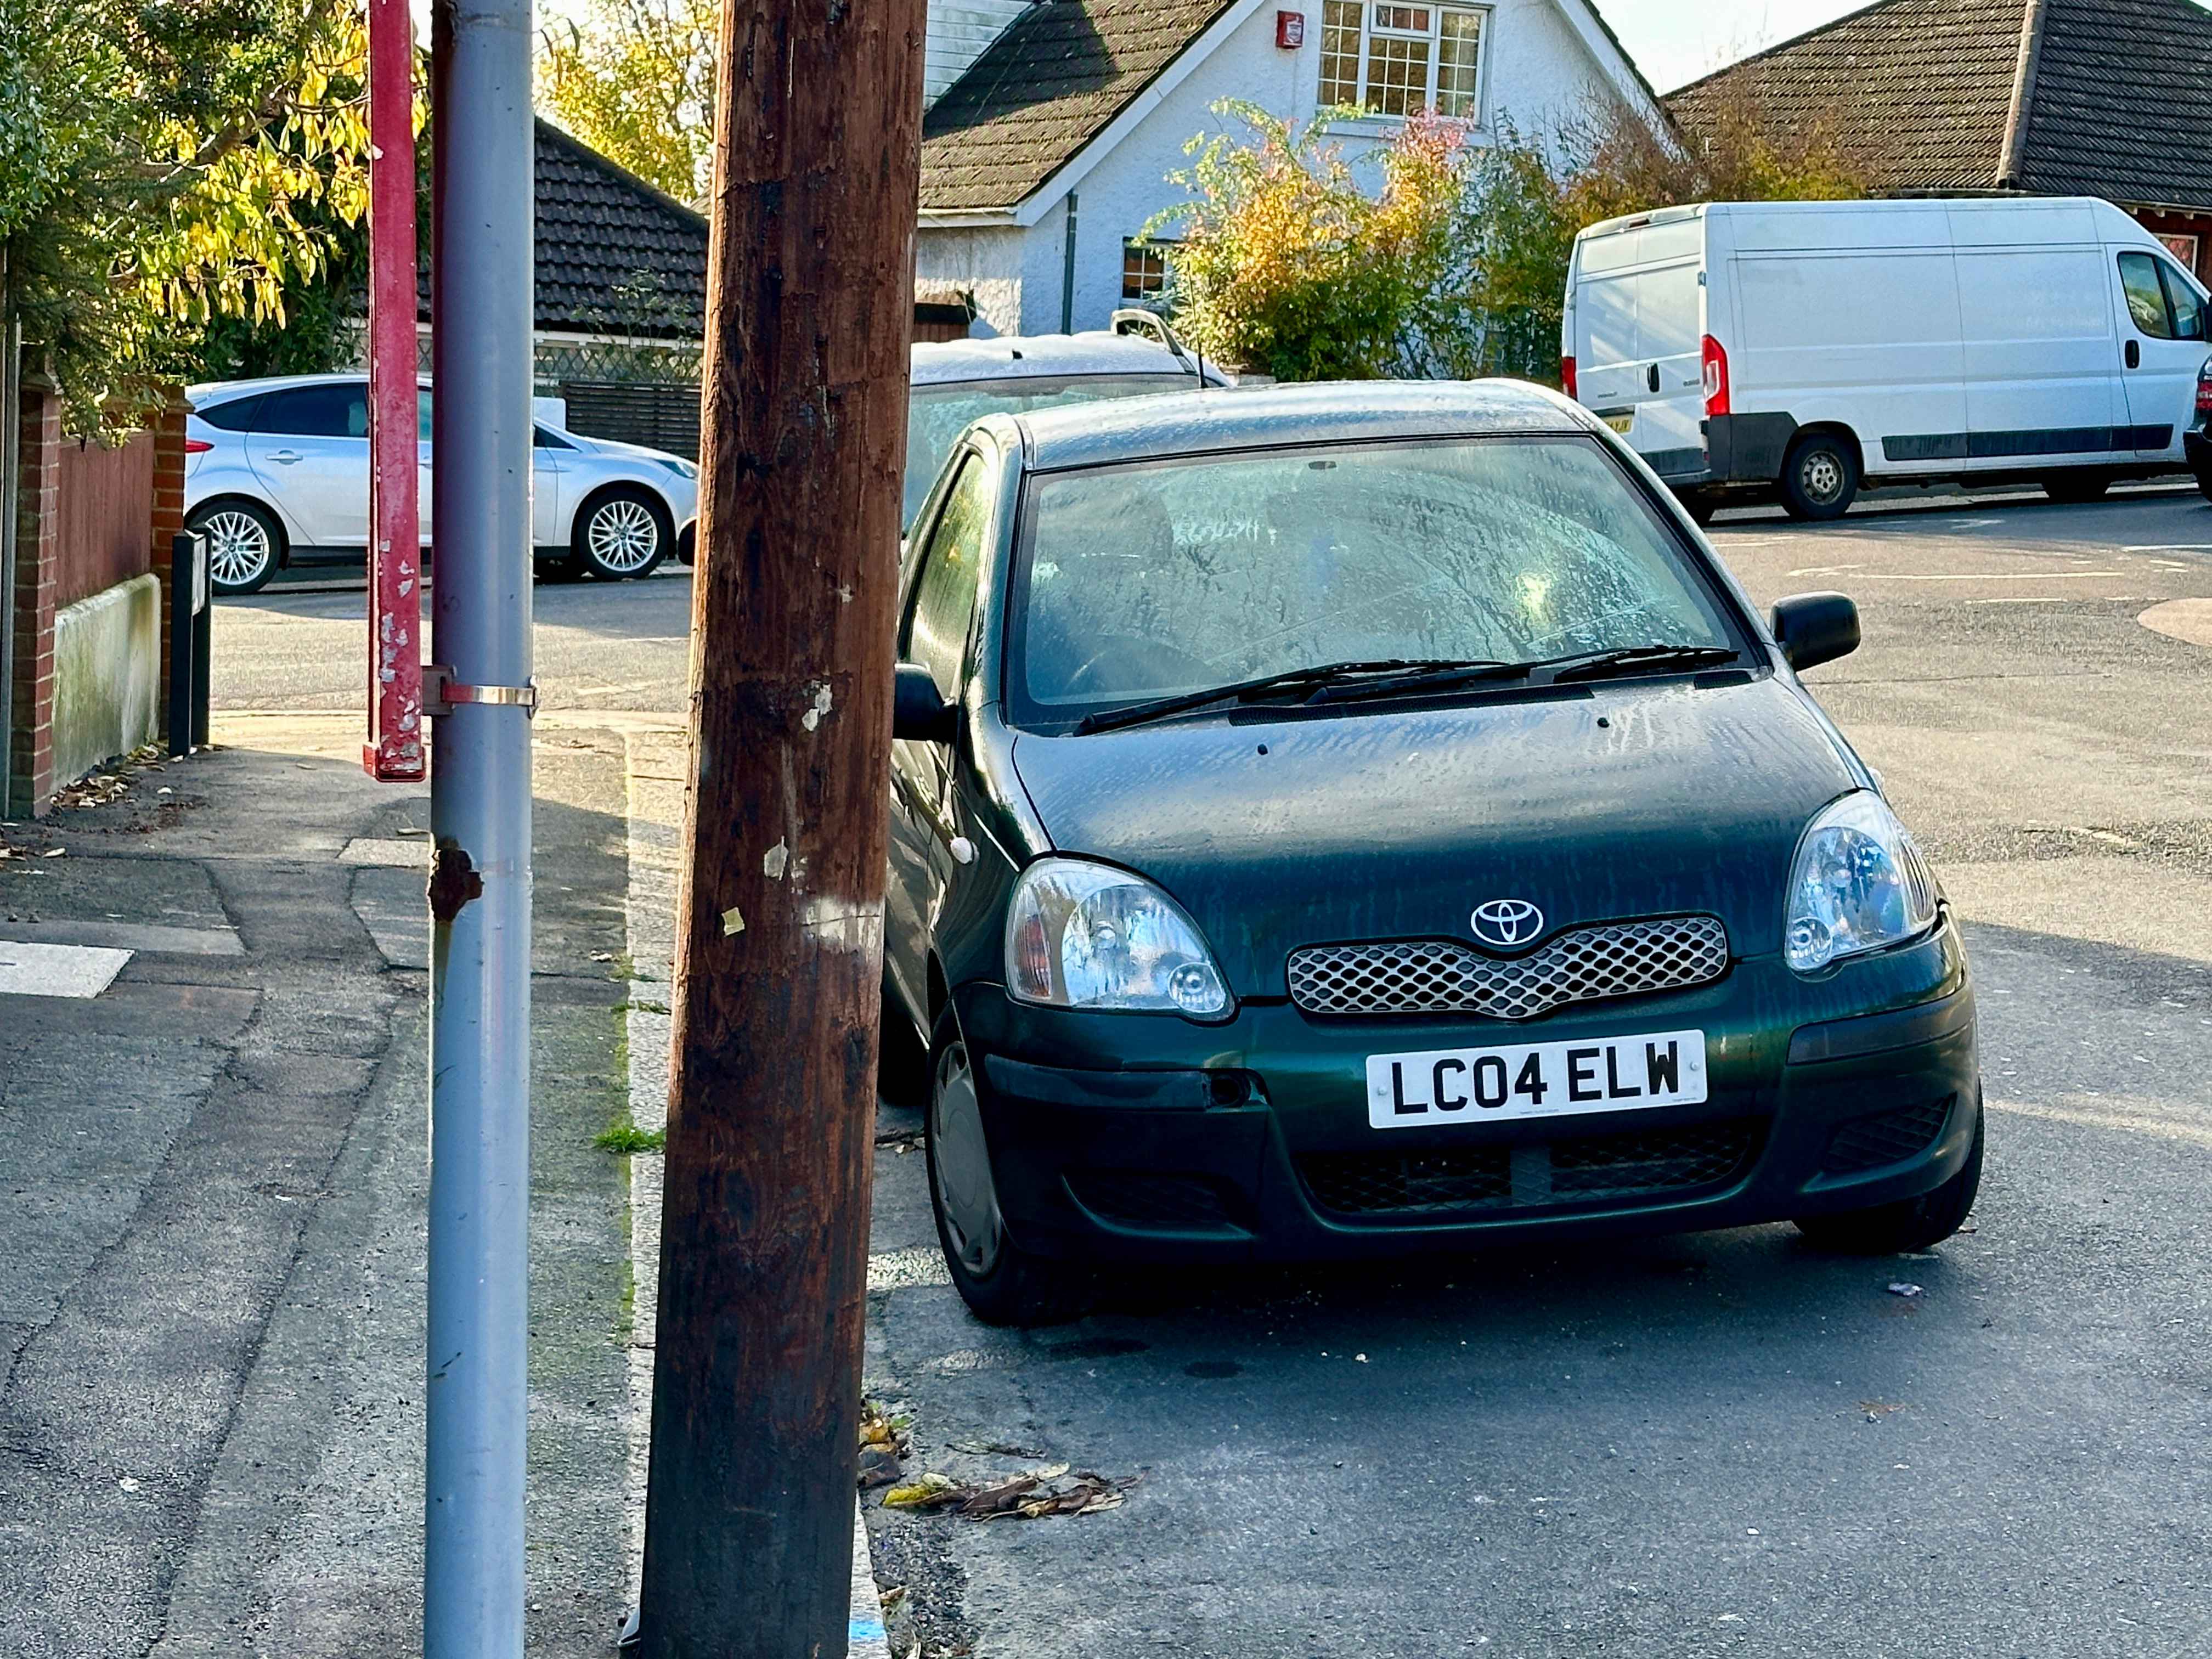 Photograph of LC04 ELW - a Green Toyota Yaris parked in Hollingdean by a non-resident. The eighth of ten photographs supplied by the residents of Hollingdean.